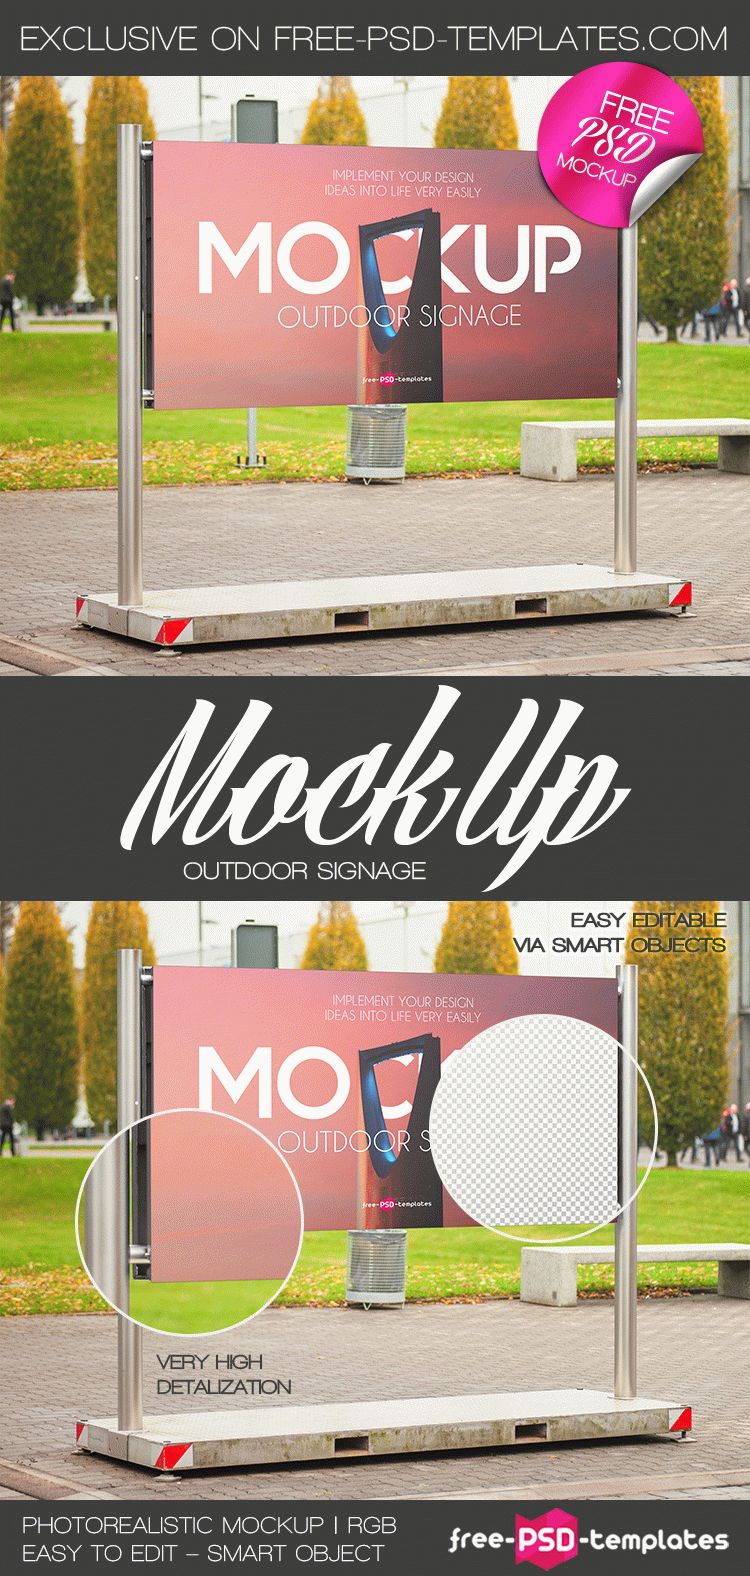 Download Free Outdoor Signage Mock Up In Psd Free Psd Templates